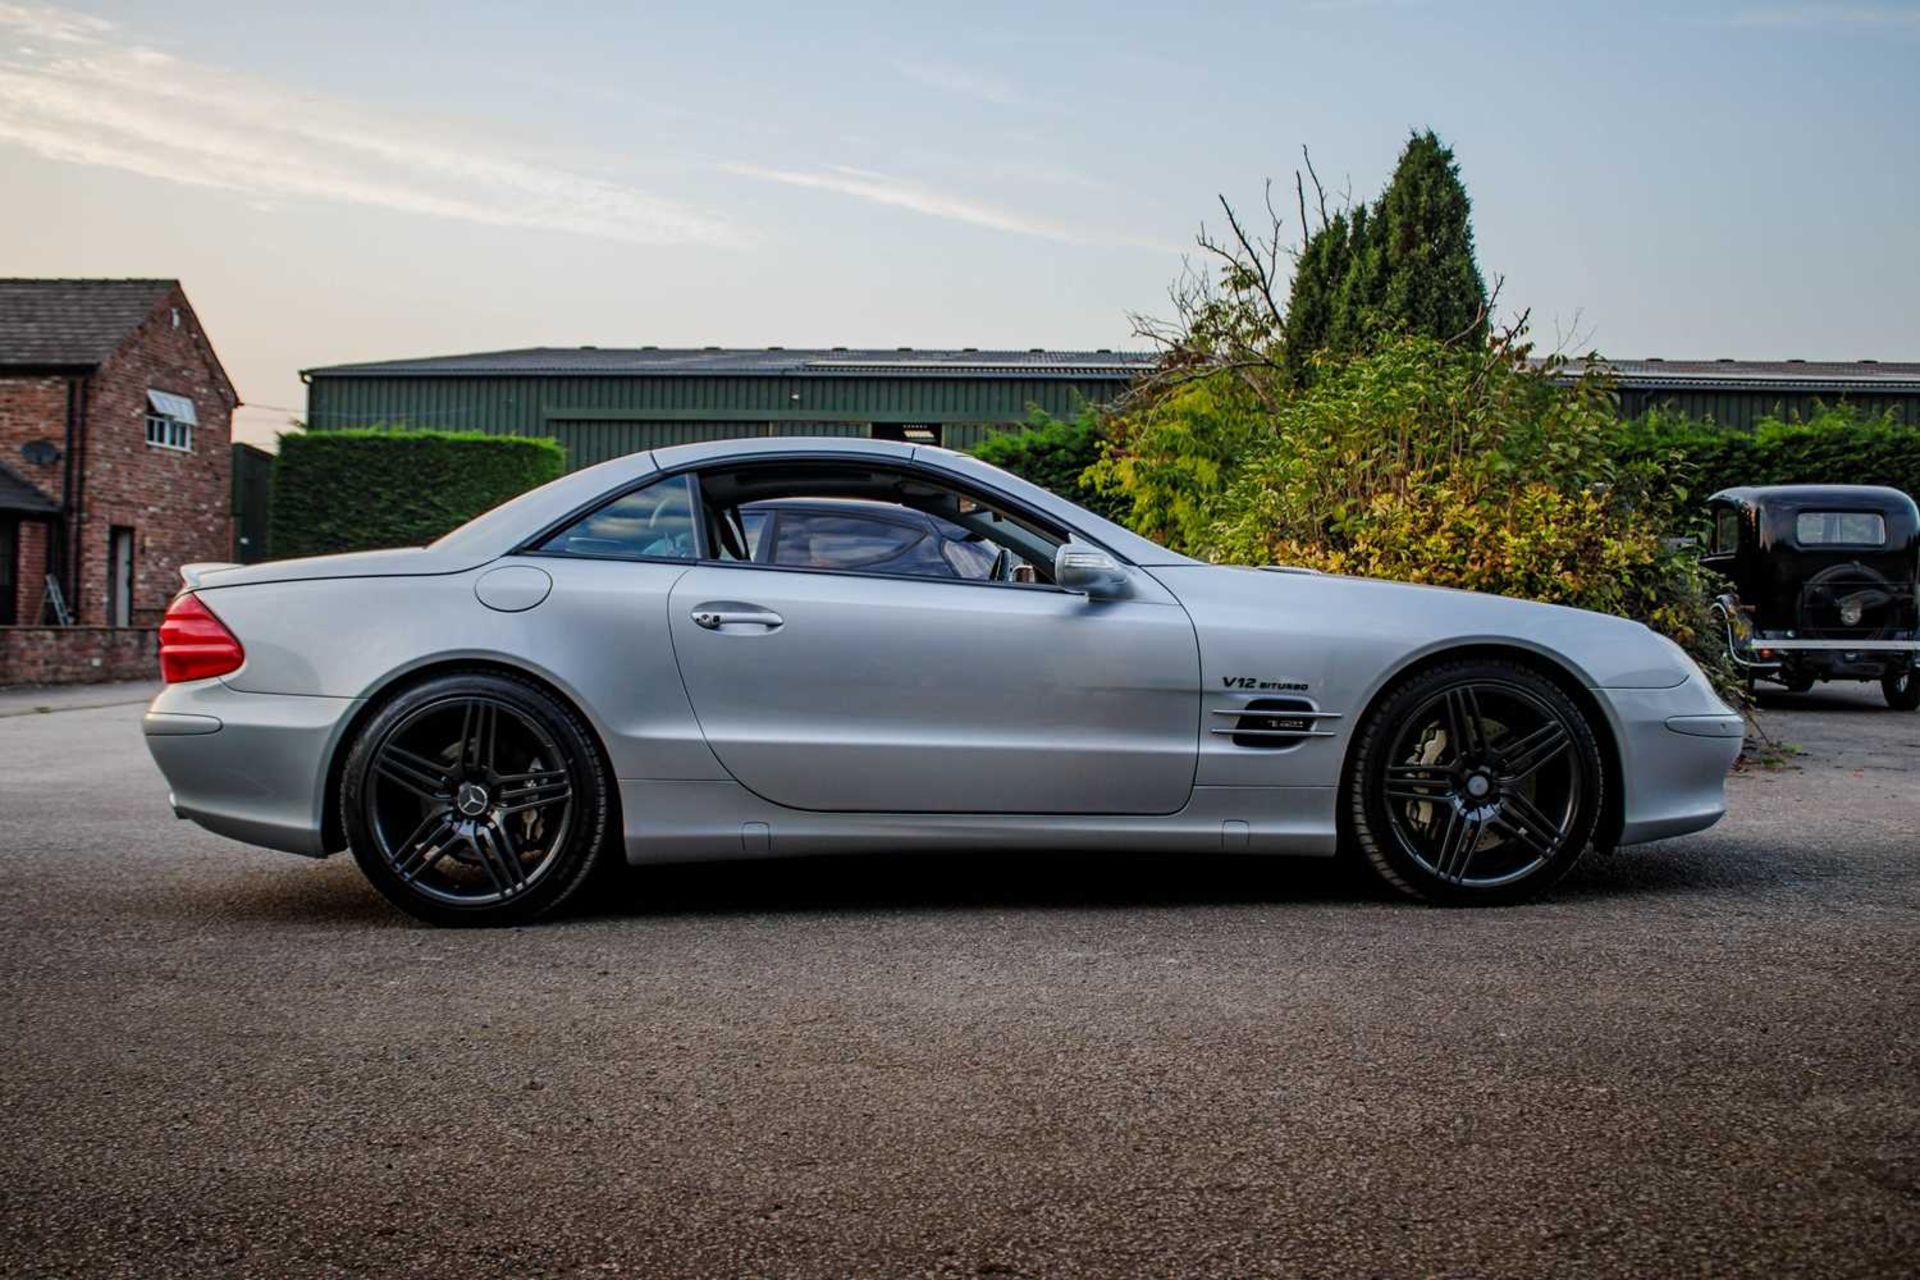 2004 Mercedes SL600 Flagship, 493bhp twin-turbo powered model  - Image 8 of 42